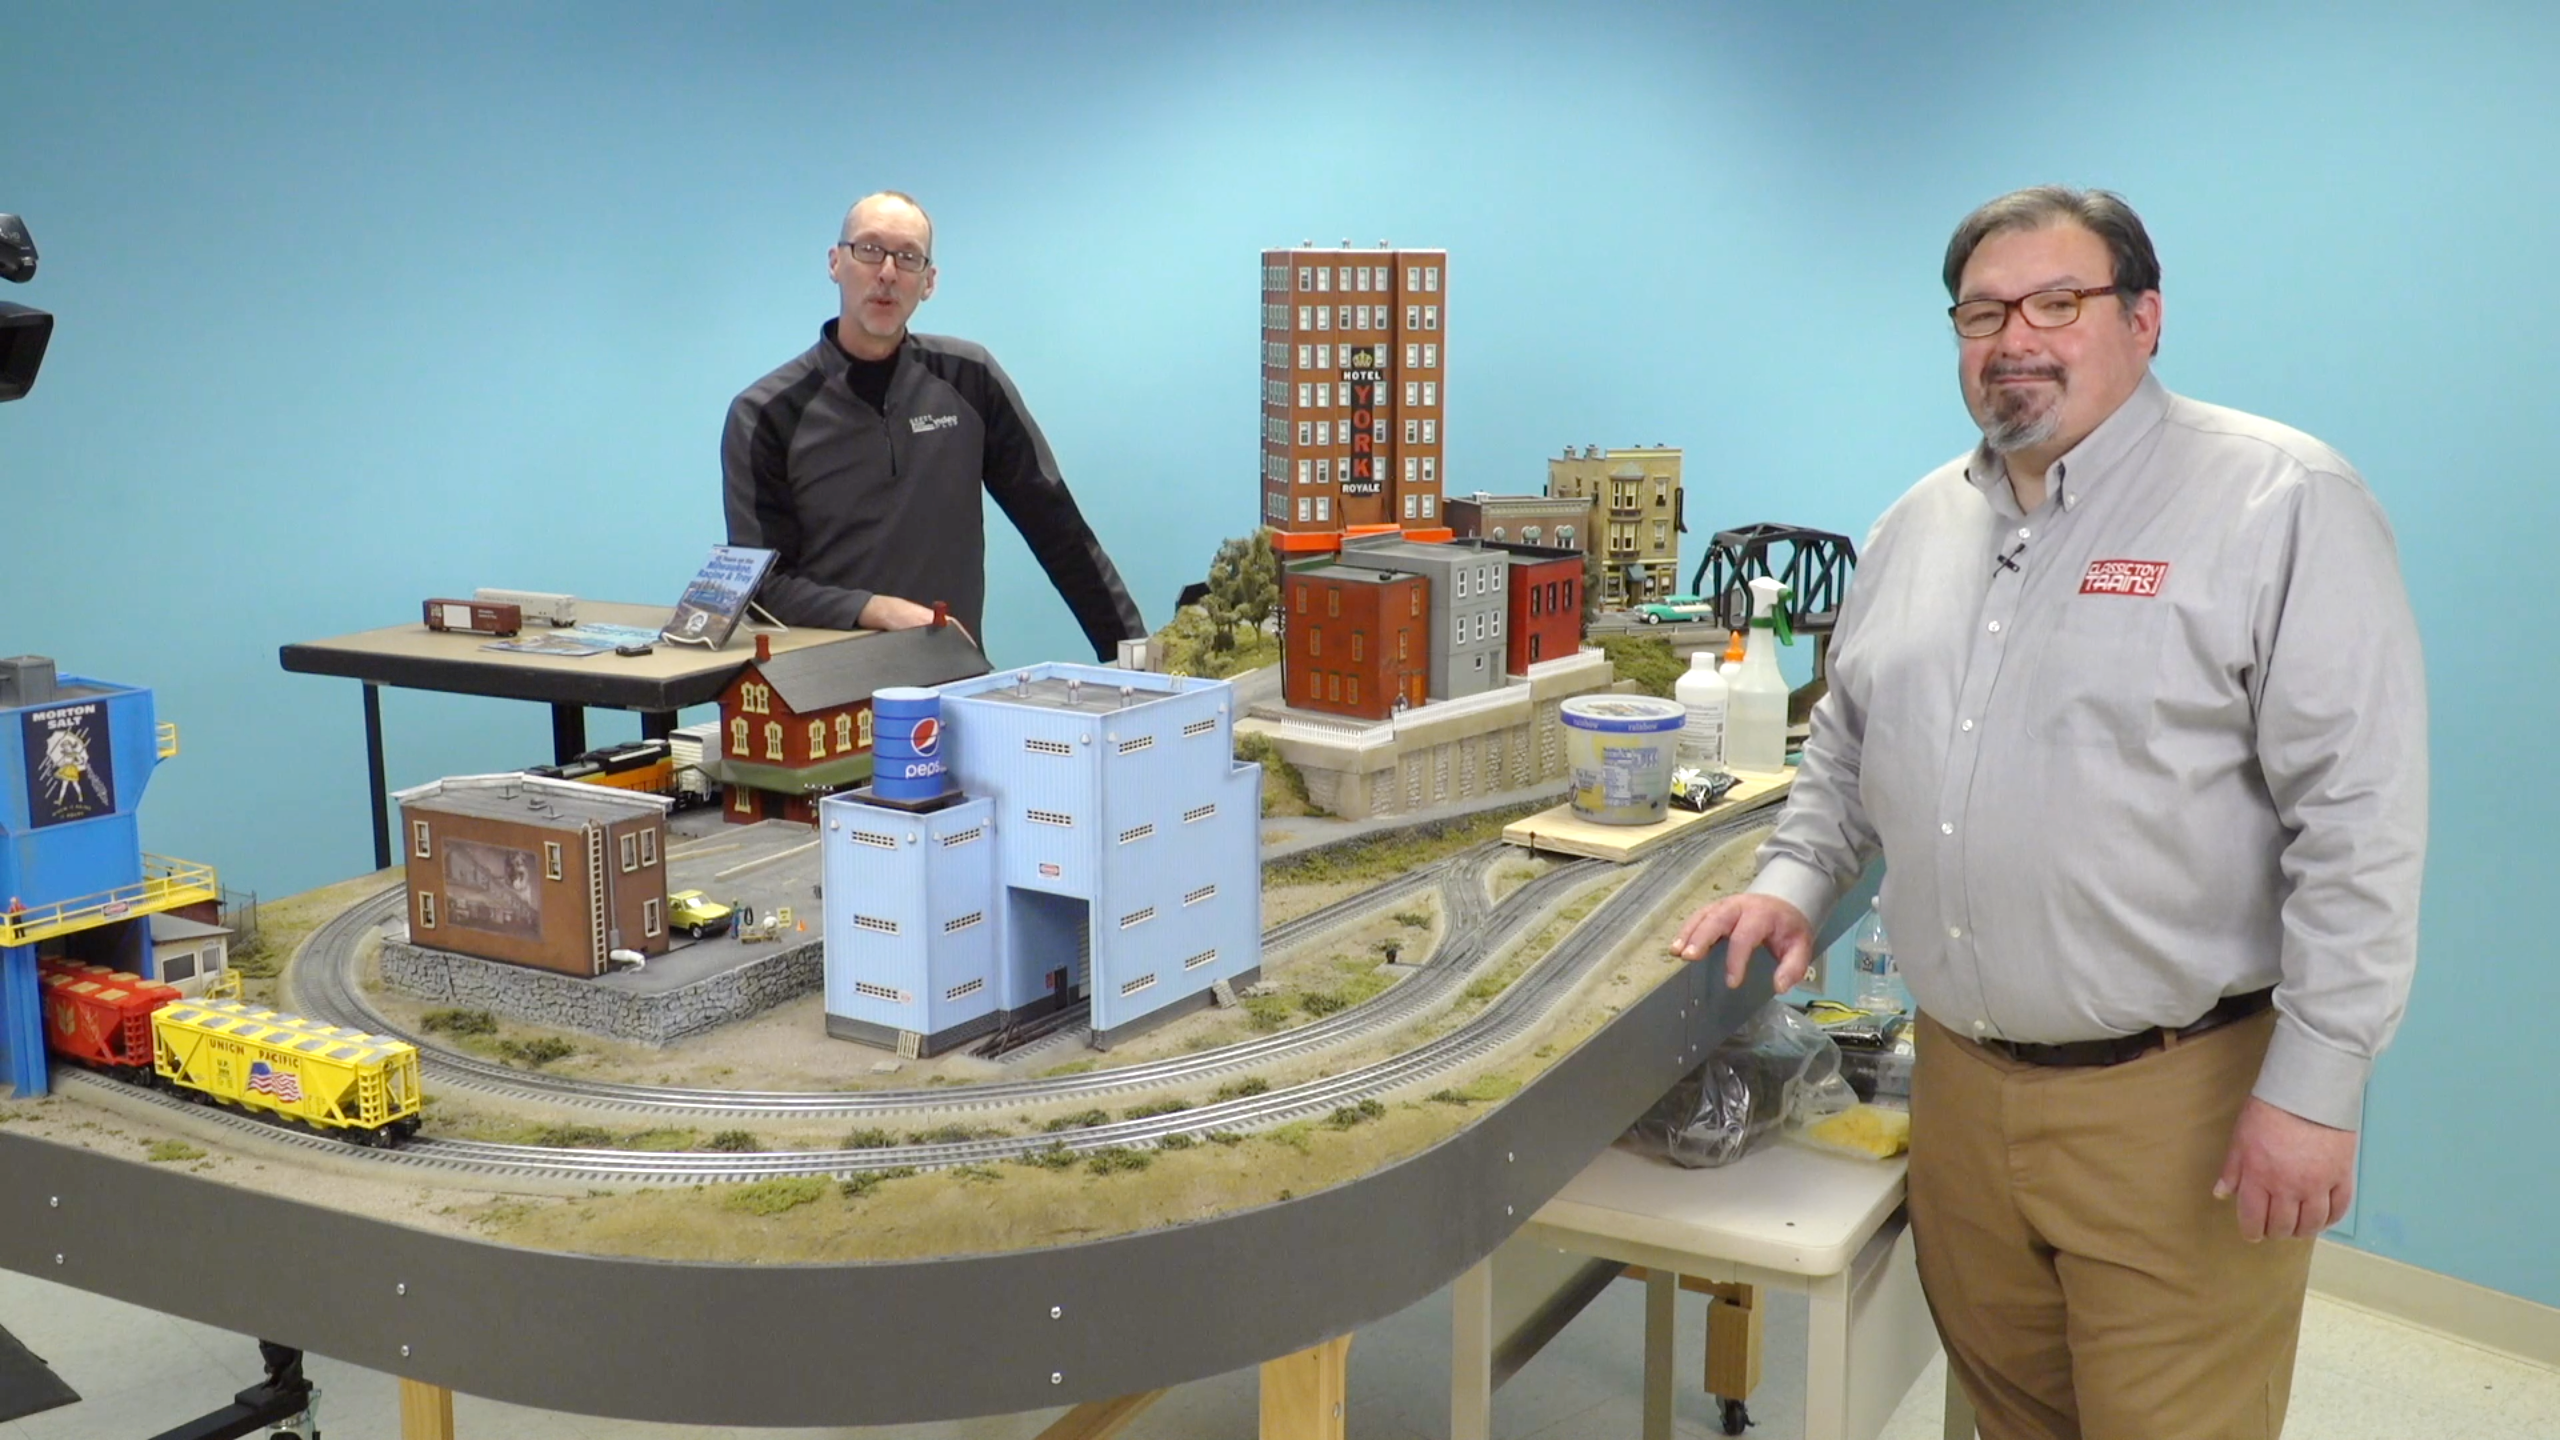 Two men standing on either side of a table-based toy train layout.